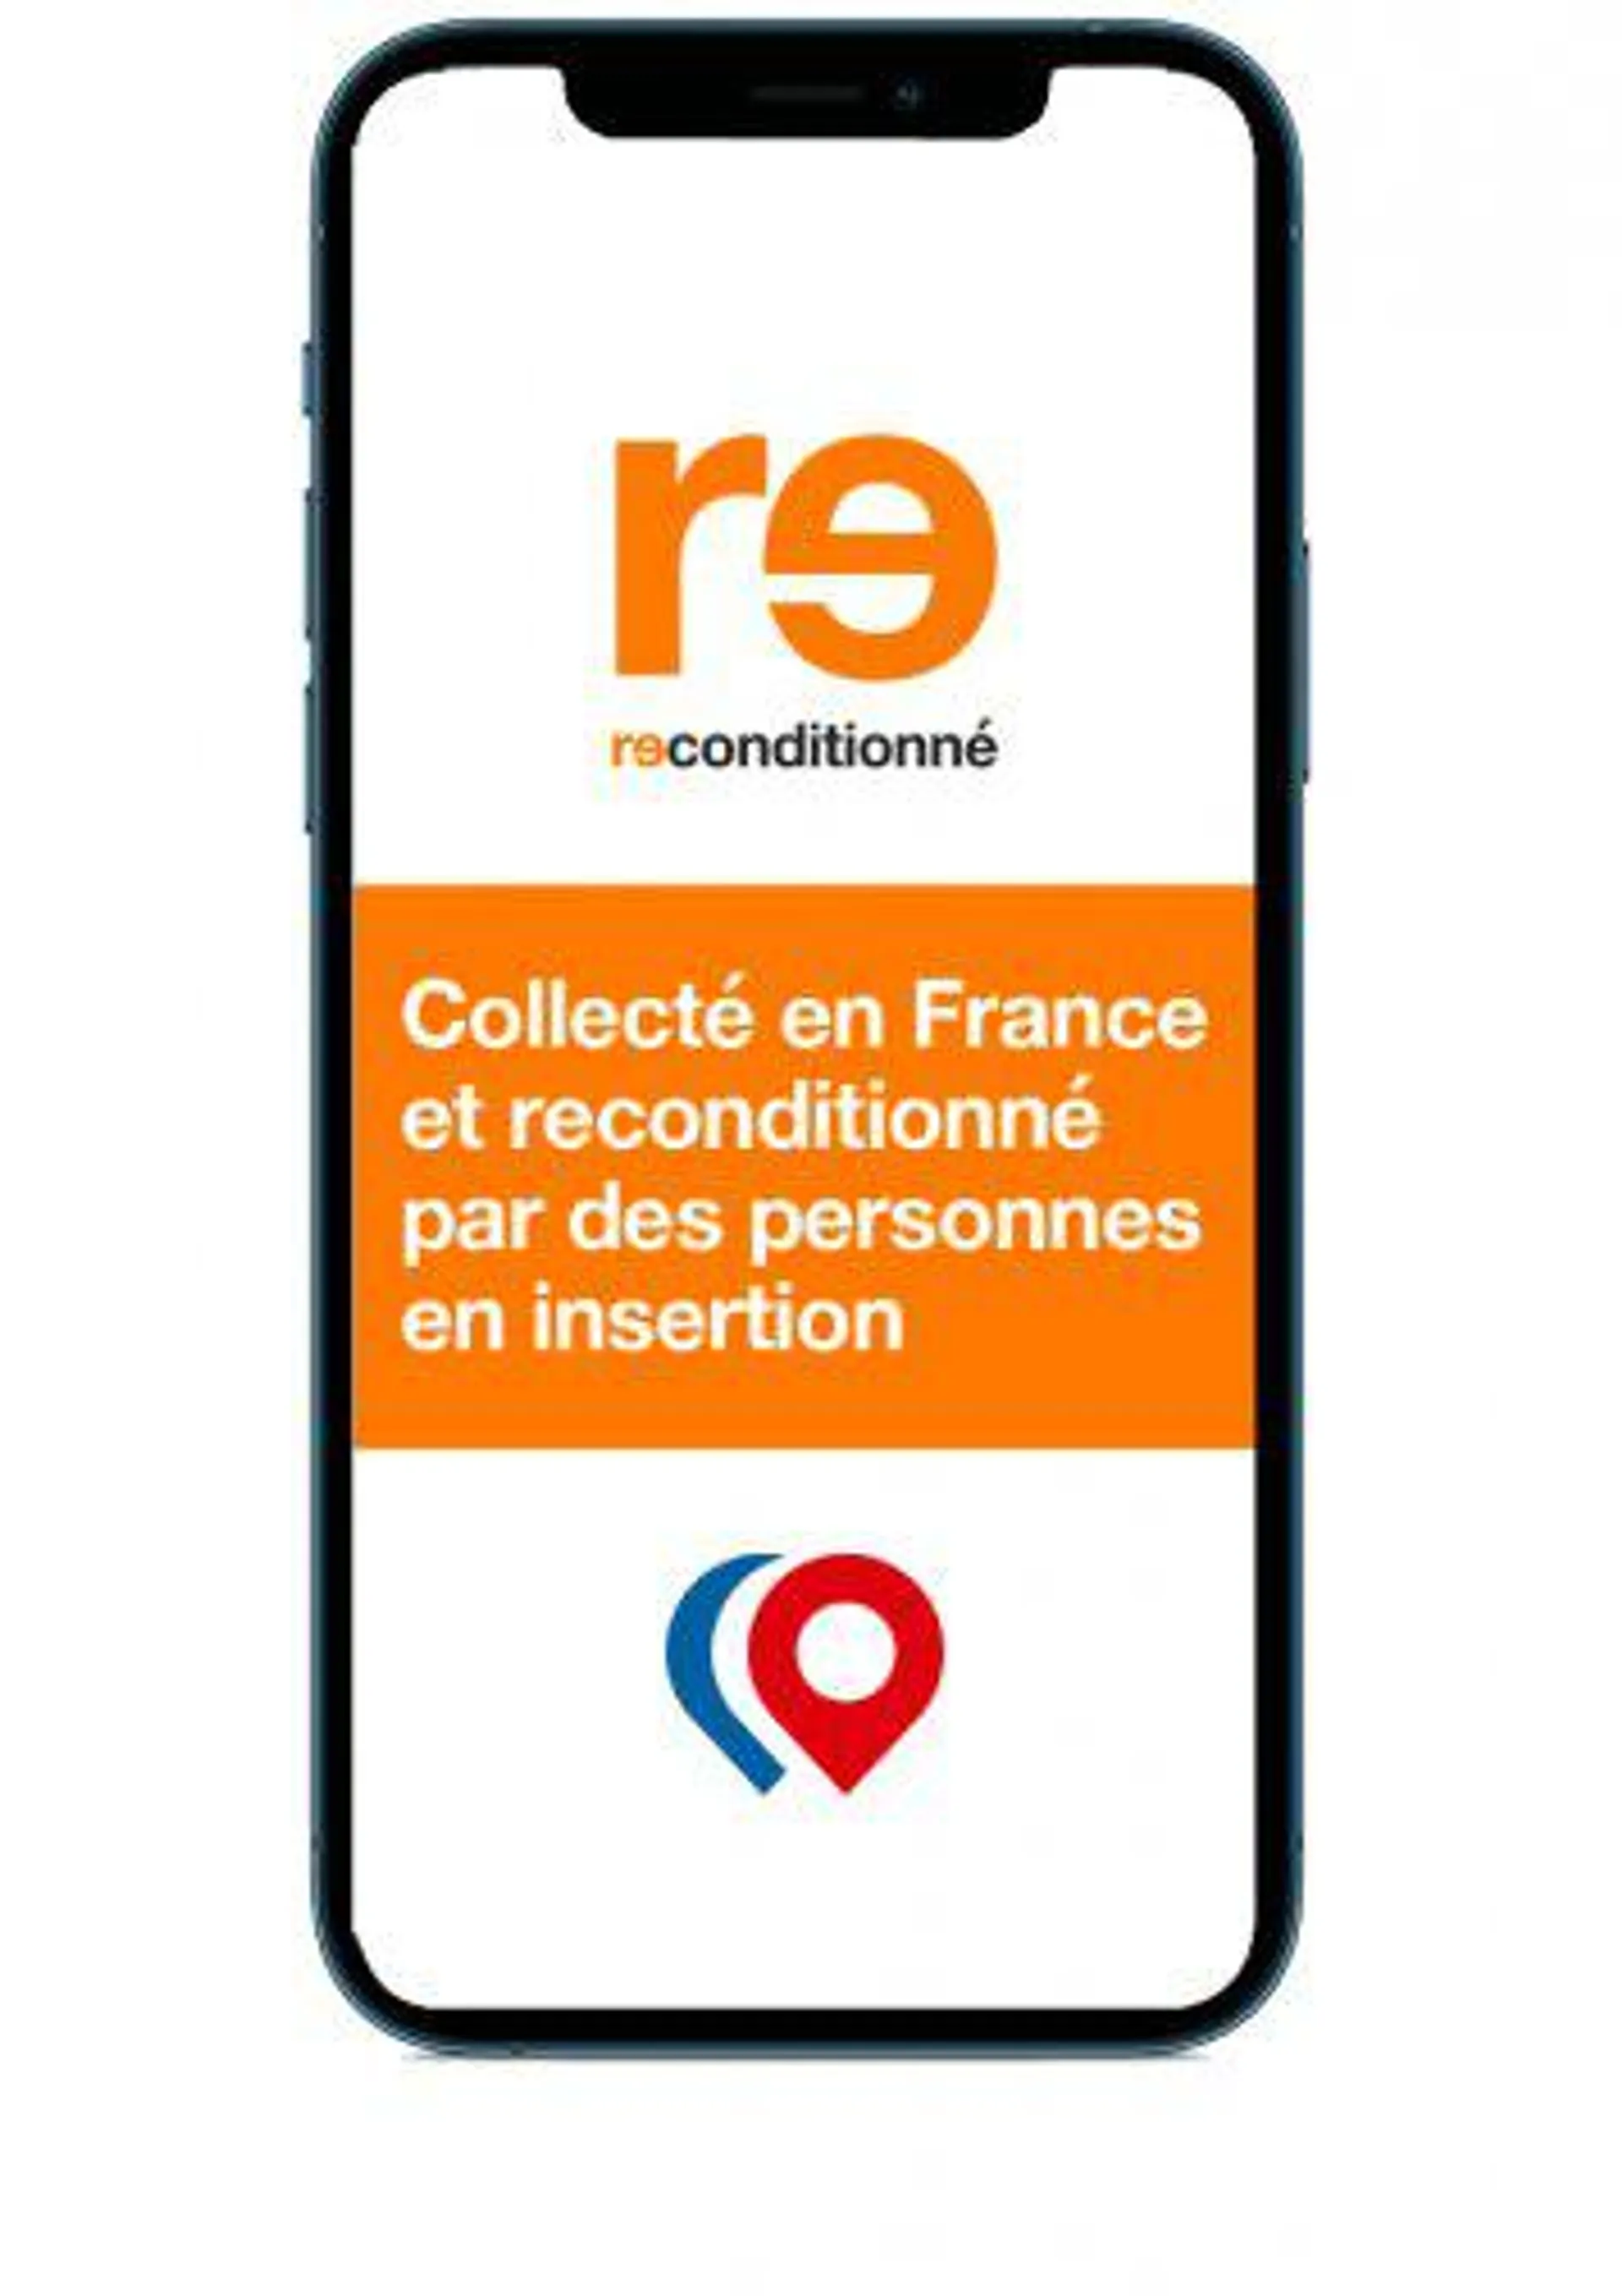 iPhone 13 Pro Max reconditionné Cadaoz Solidaire